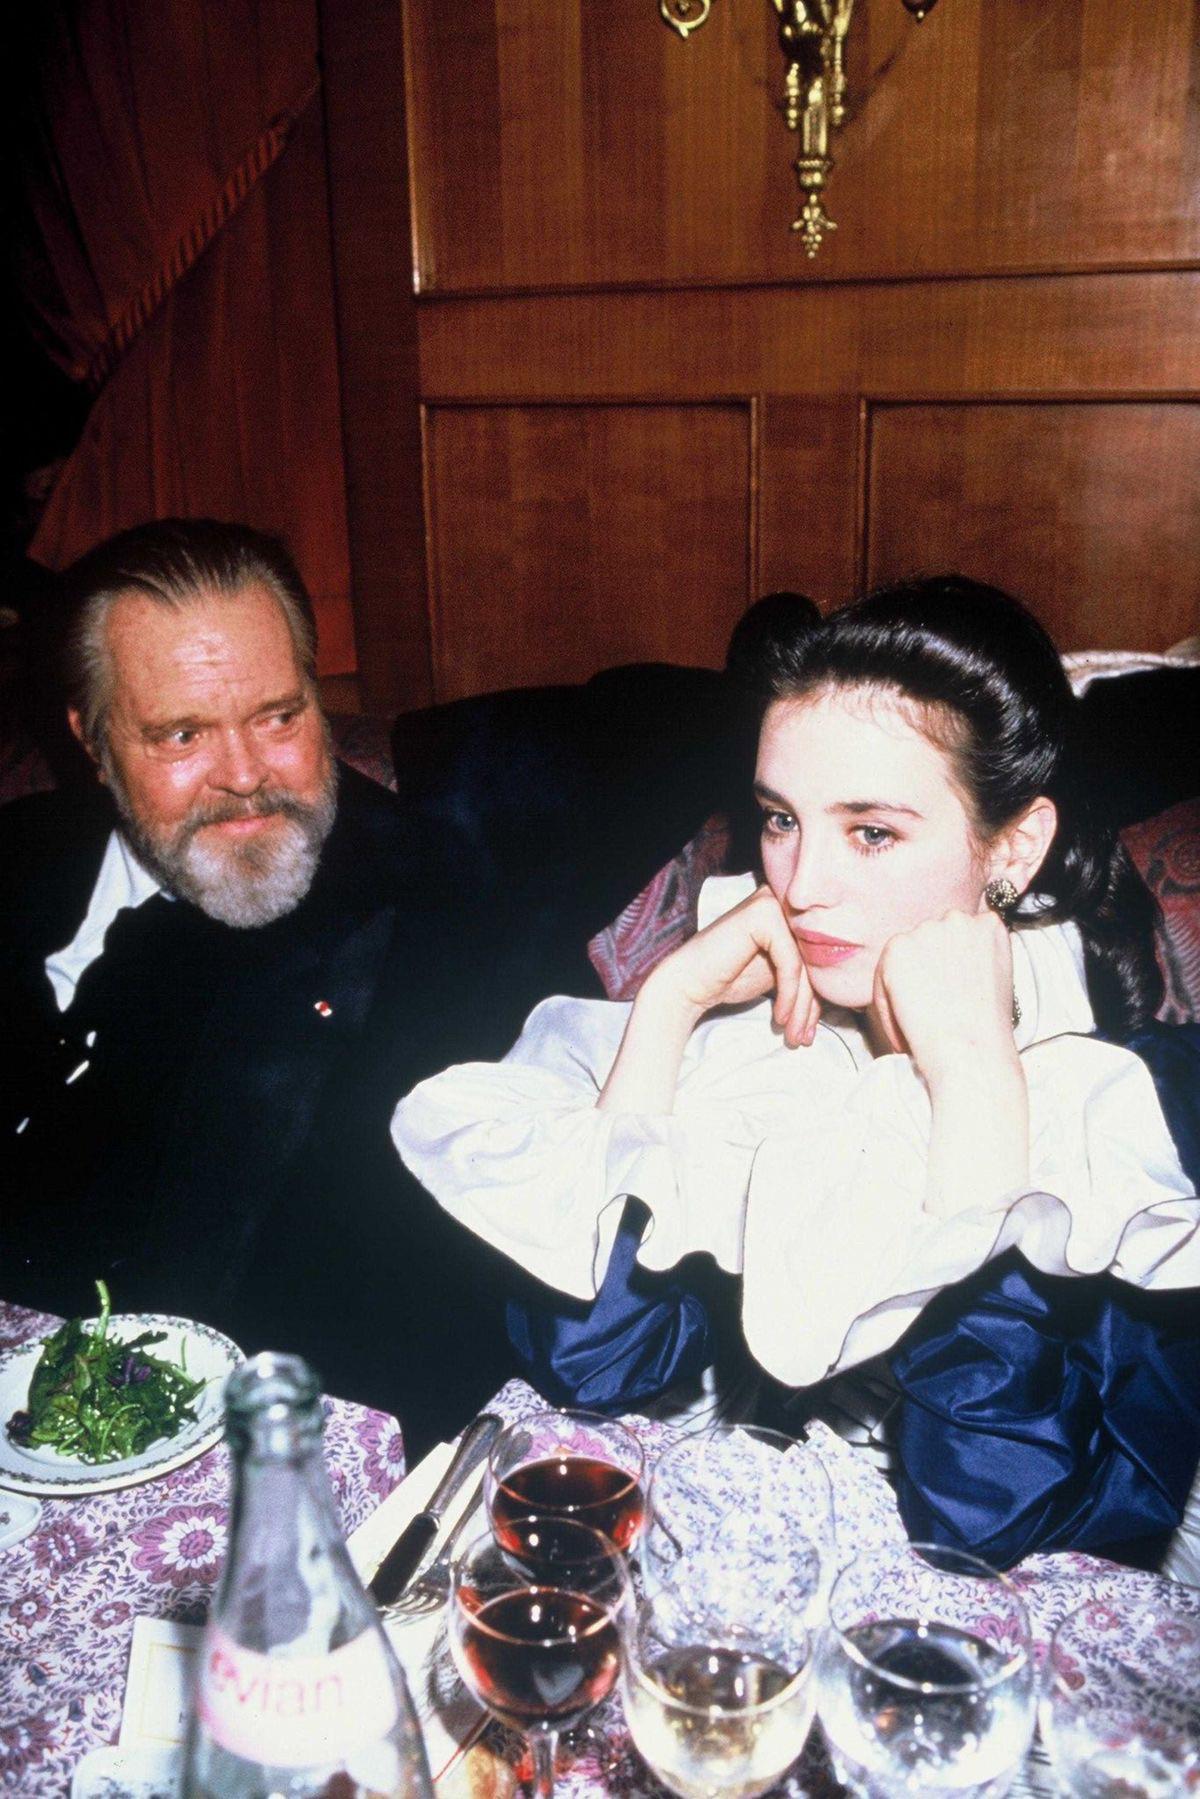 Orson Welles and Isabelle Adjani at the Césars after party, c. 1982.jpeg